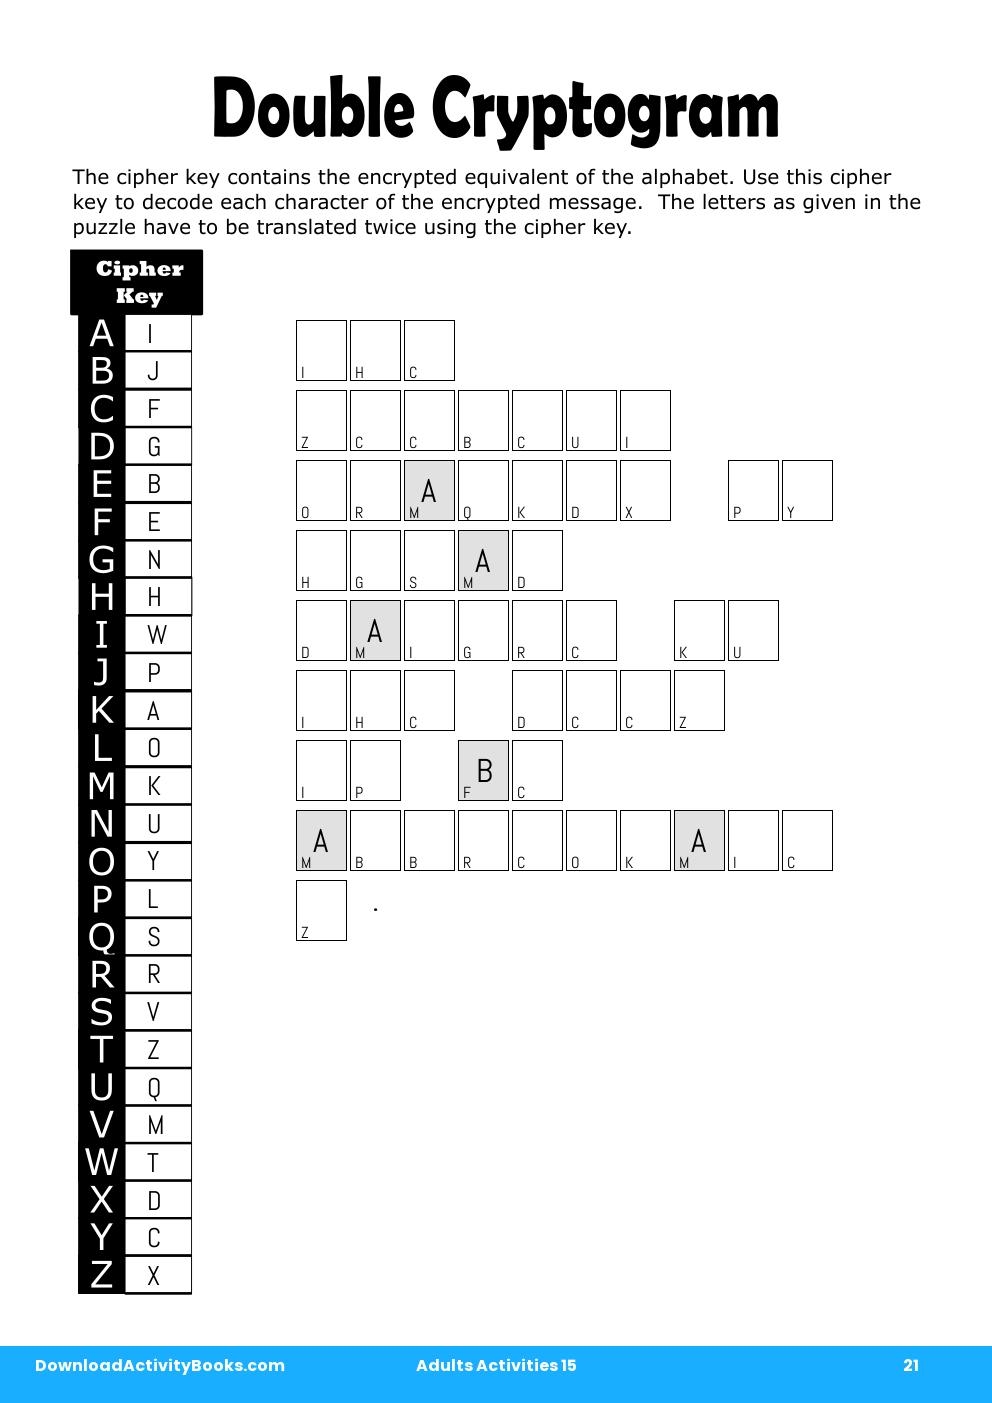 Double Cryptogram in Adults Activities 15